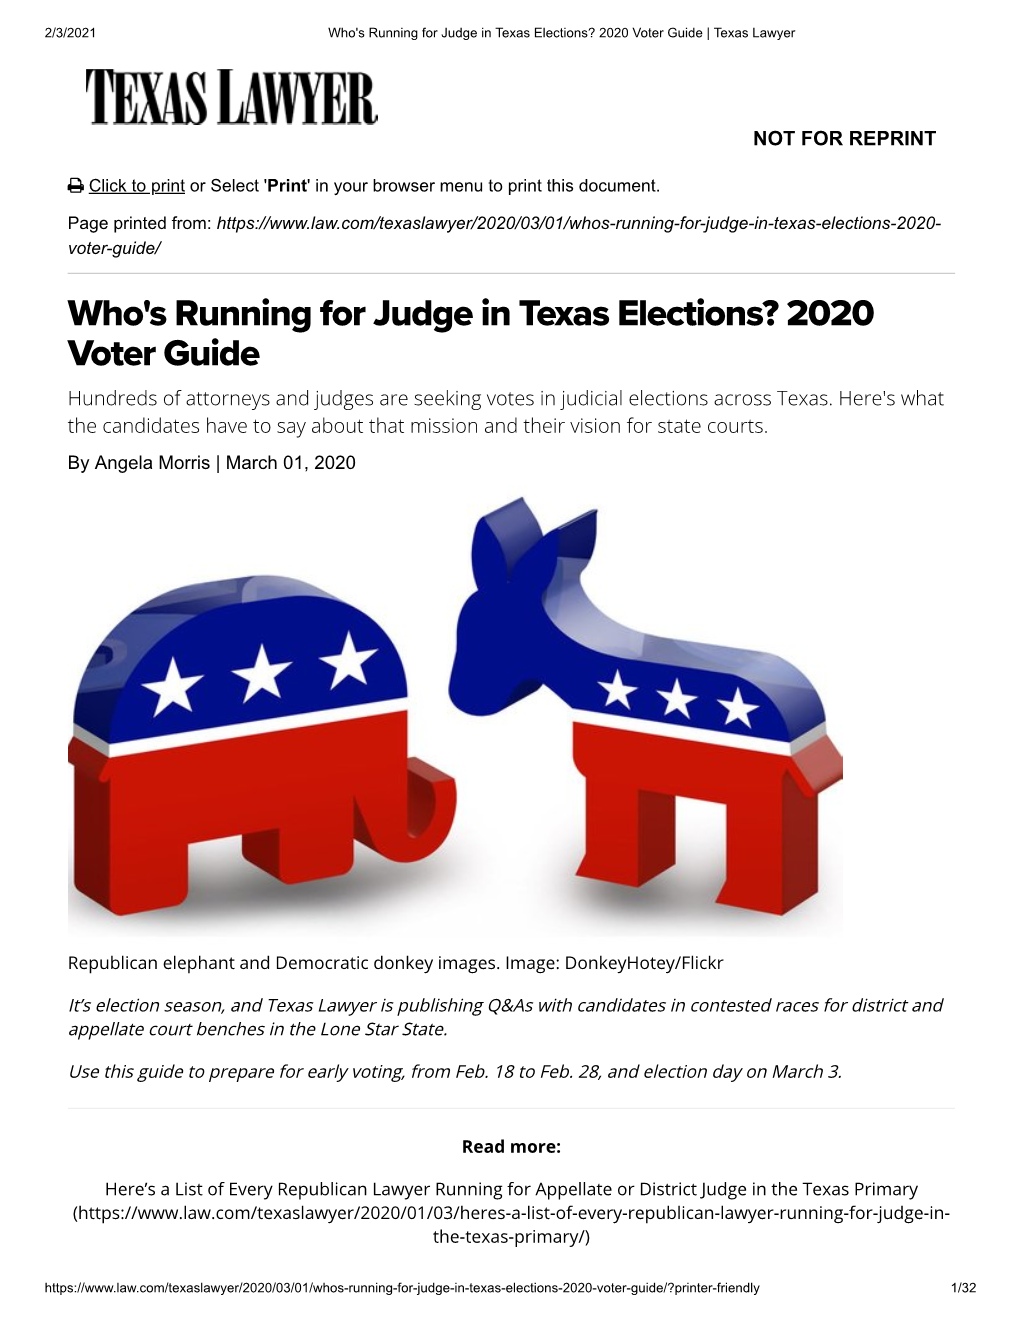 Who's Running for Judge in Texas Elections? 2020 Voter Guide | Texas Lawyer